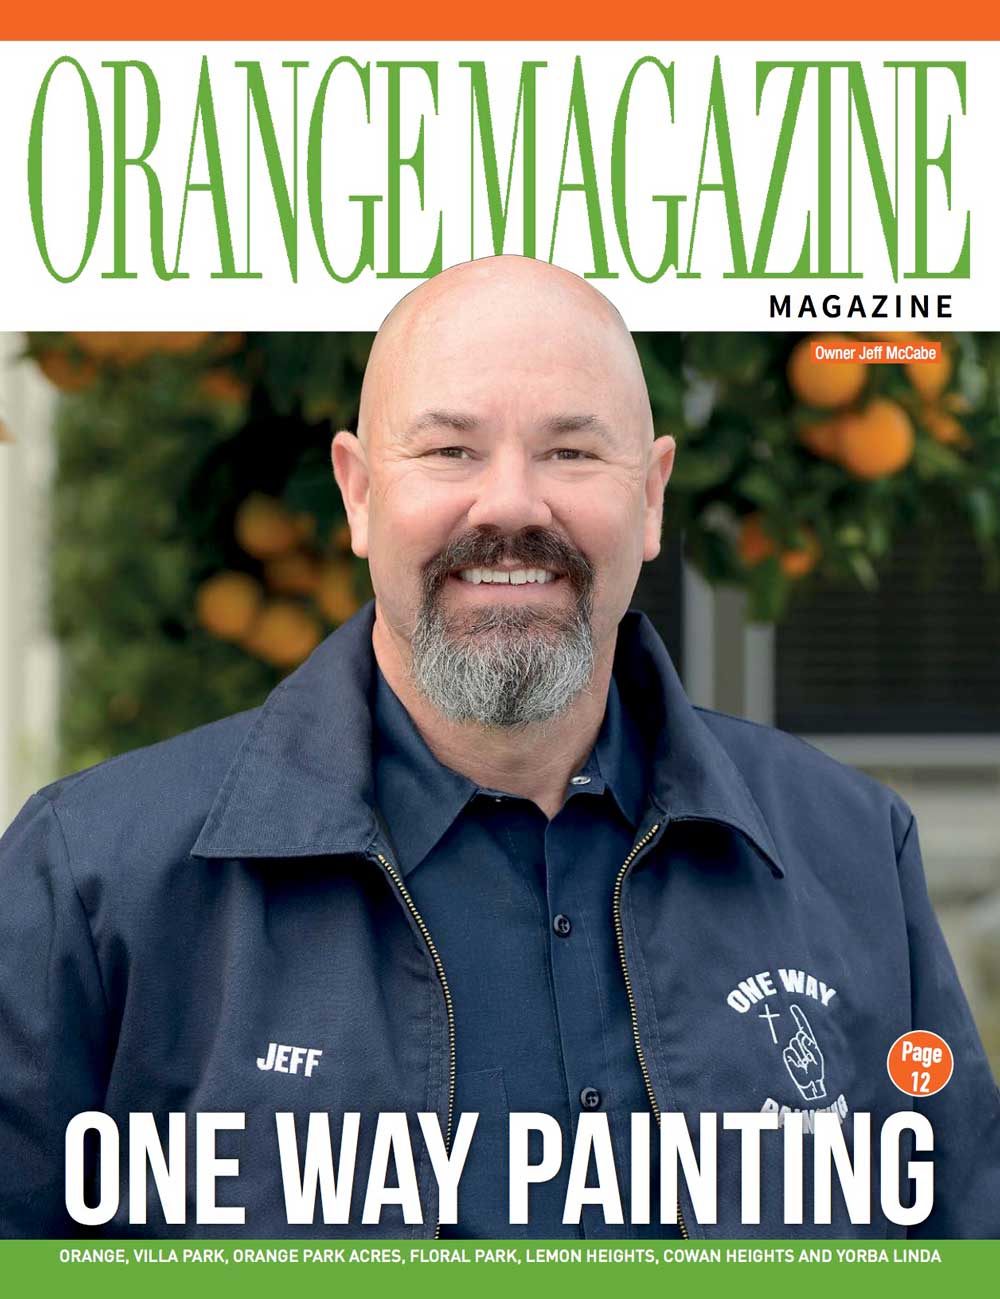 Jeff McCabe, of One Way Painting, featured on cover of Orange Magazine